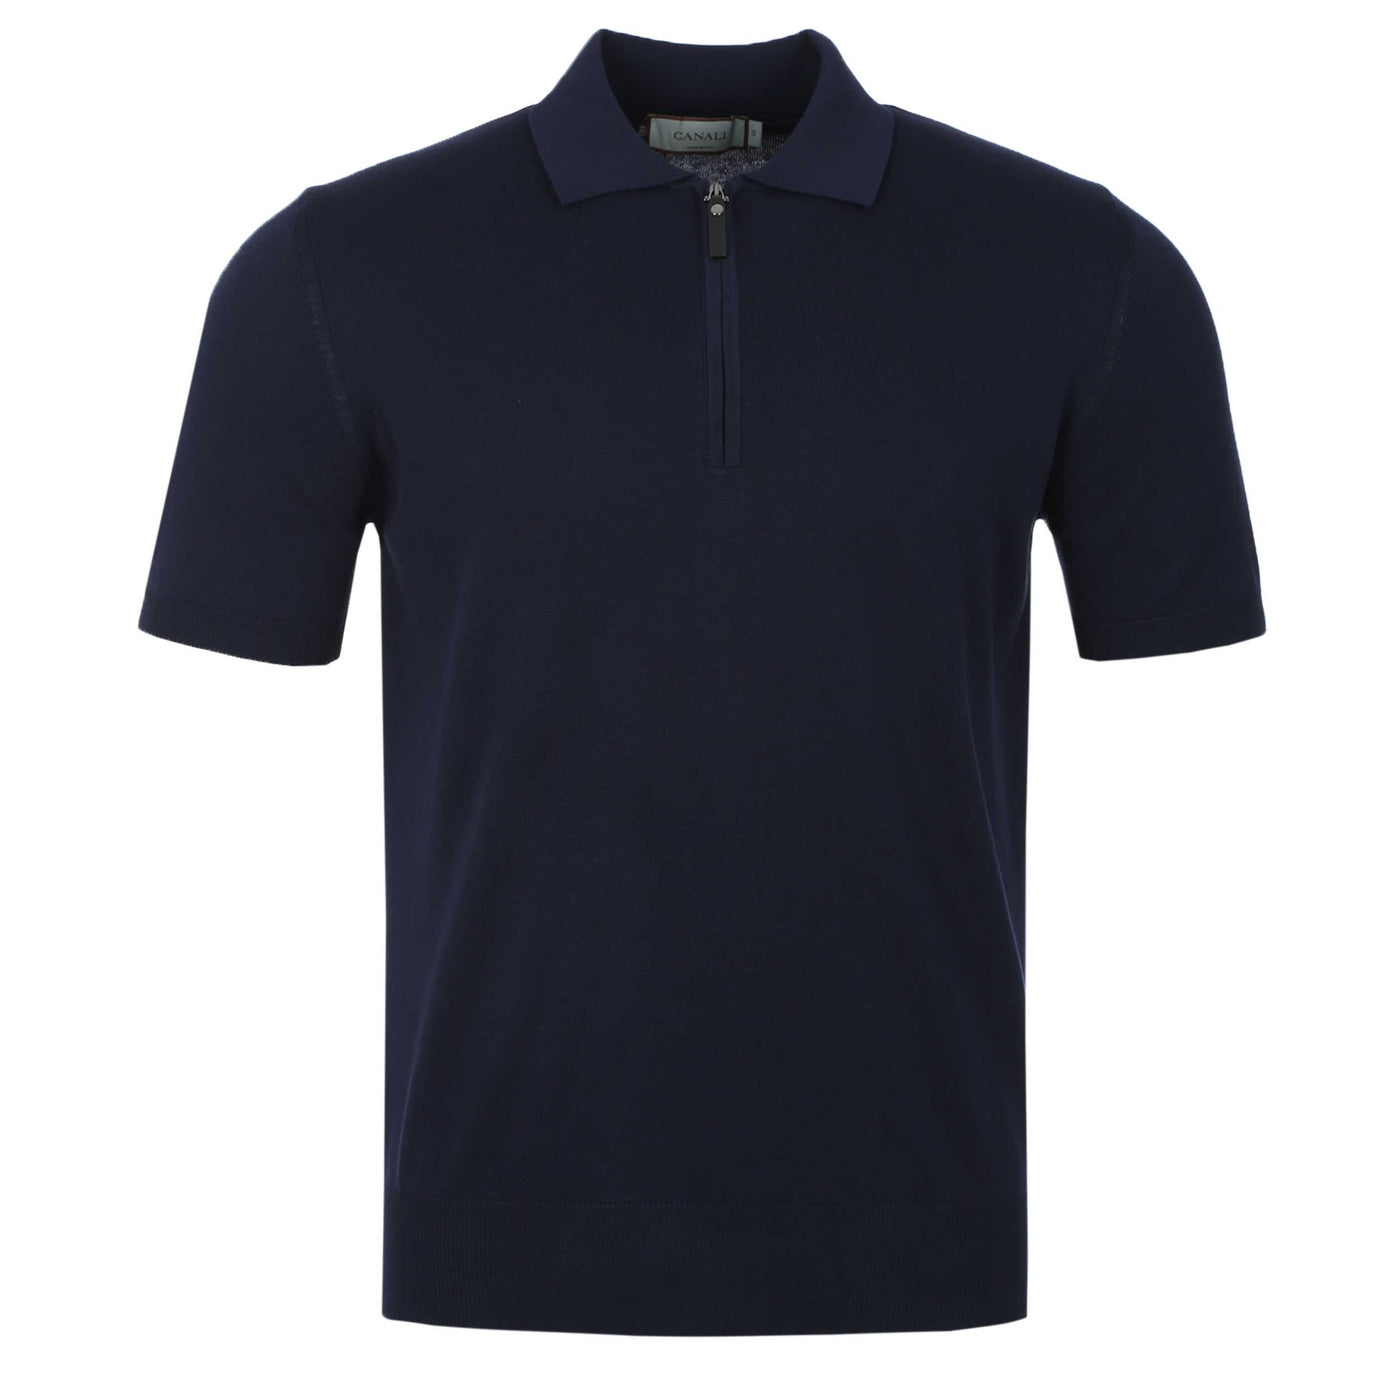 Canali Zip Polo Shirt in Navy